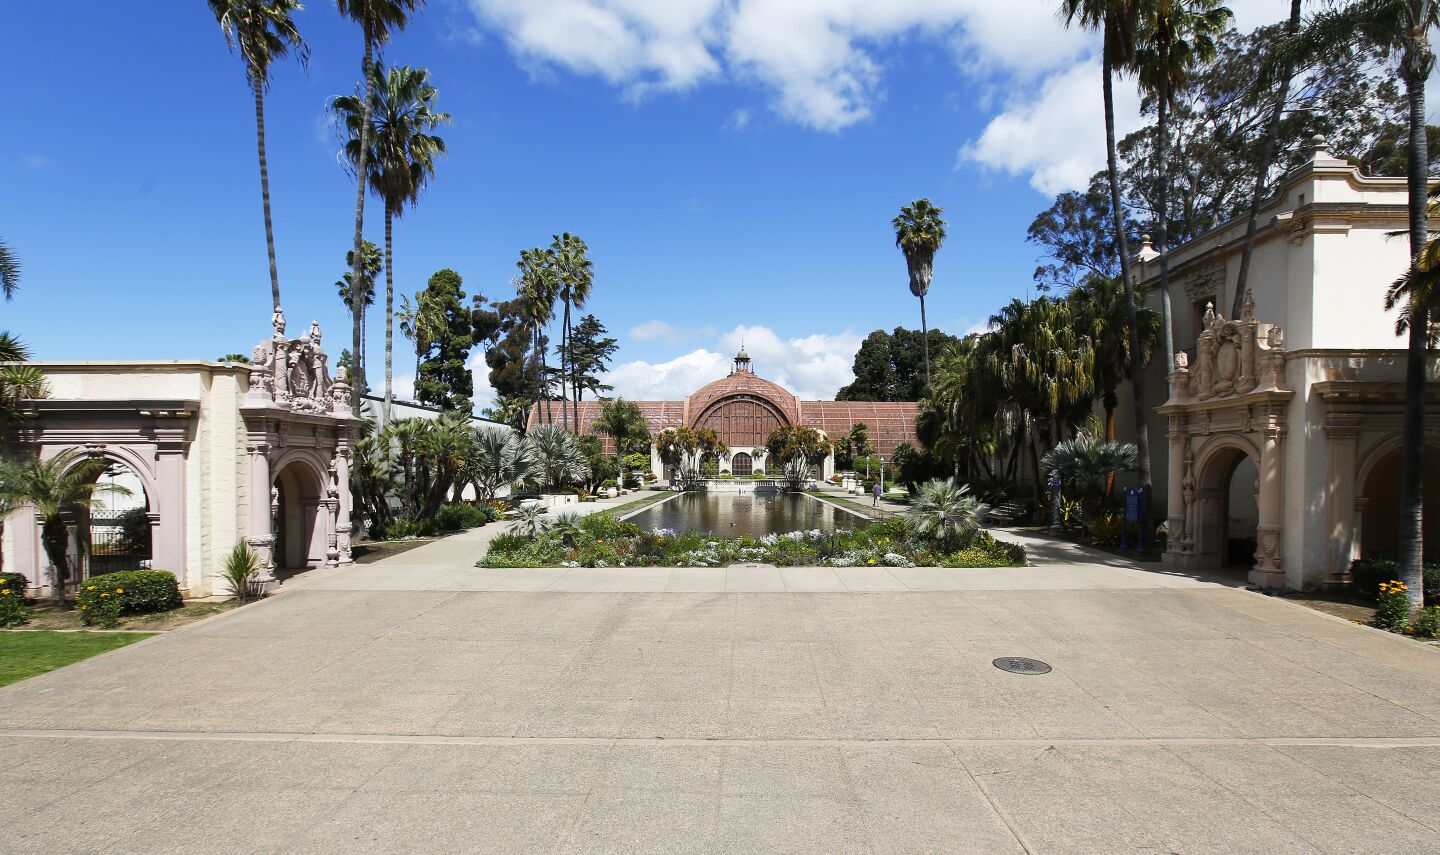 El Prado and the Lily Pond in Balboa Park are empty on March 24, 2020. San Diego Mayor Kevin Faulconer closed all beaches and parks due to the coronavirus.